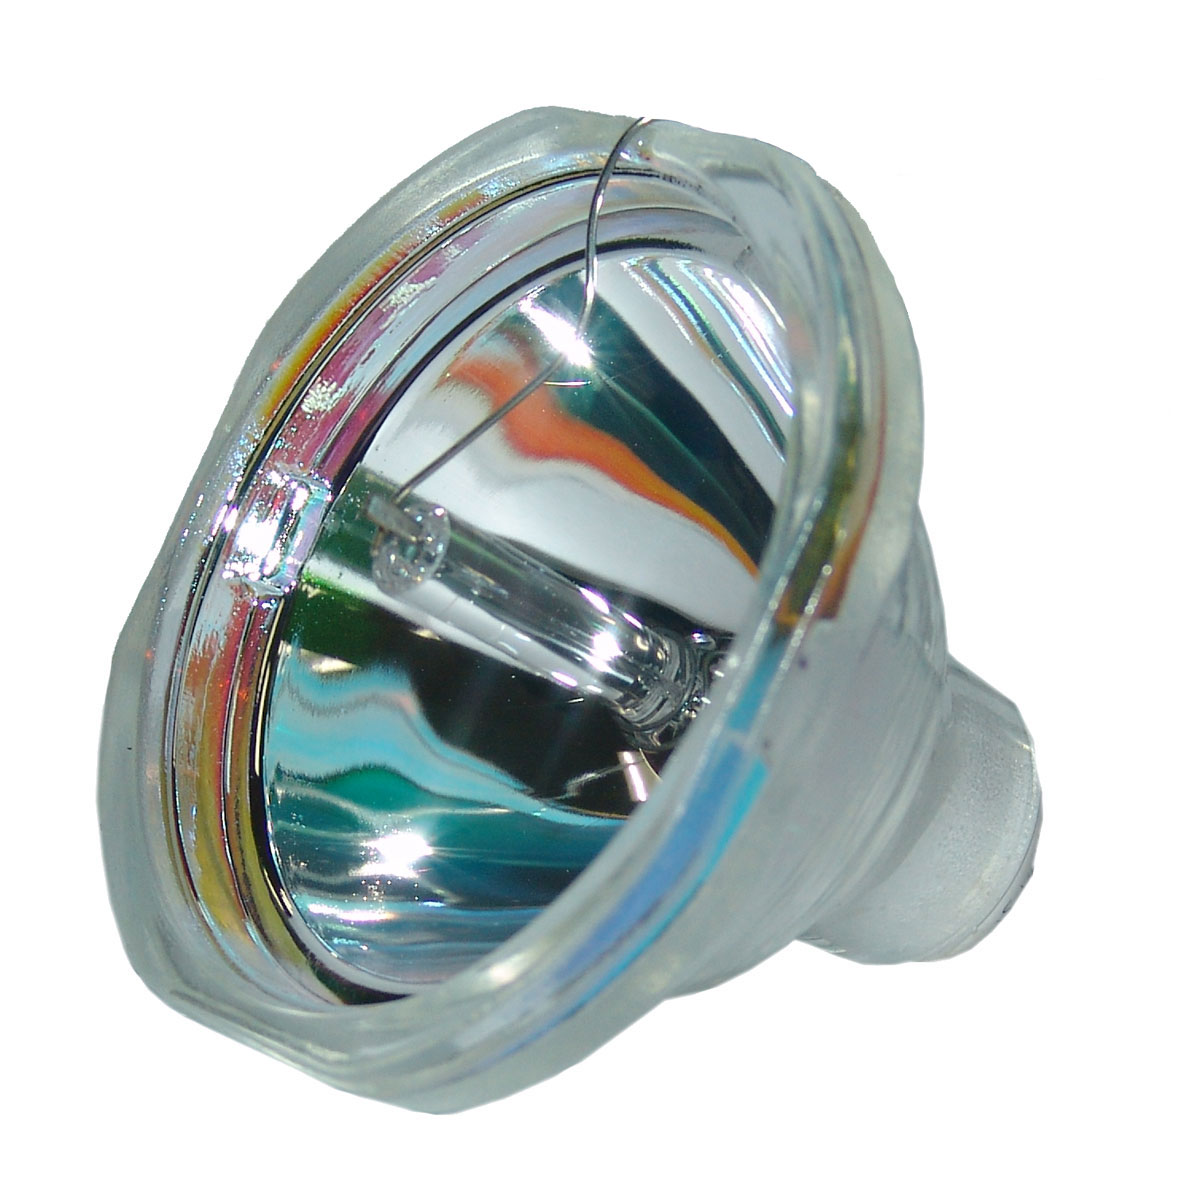 Lutema Economy for Hitachi DT00621 Projector Lamp (Bulb Only) - image 1 of 6